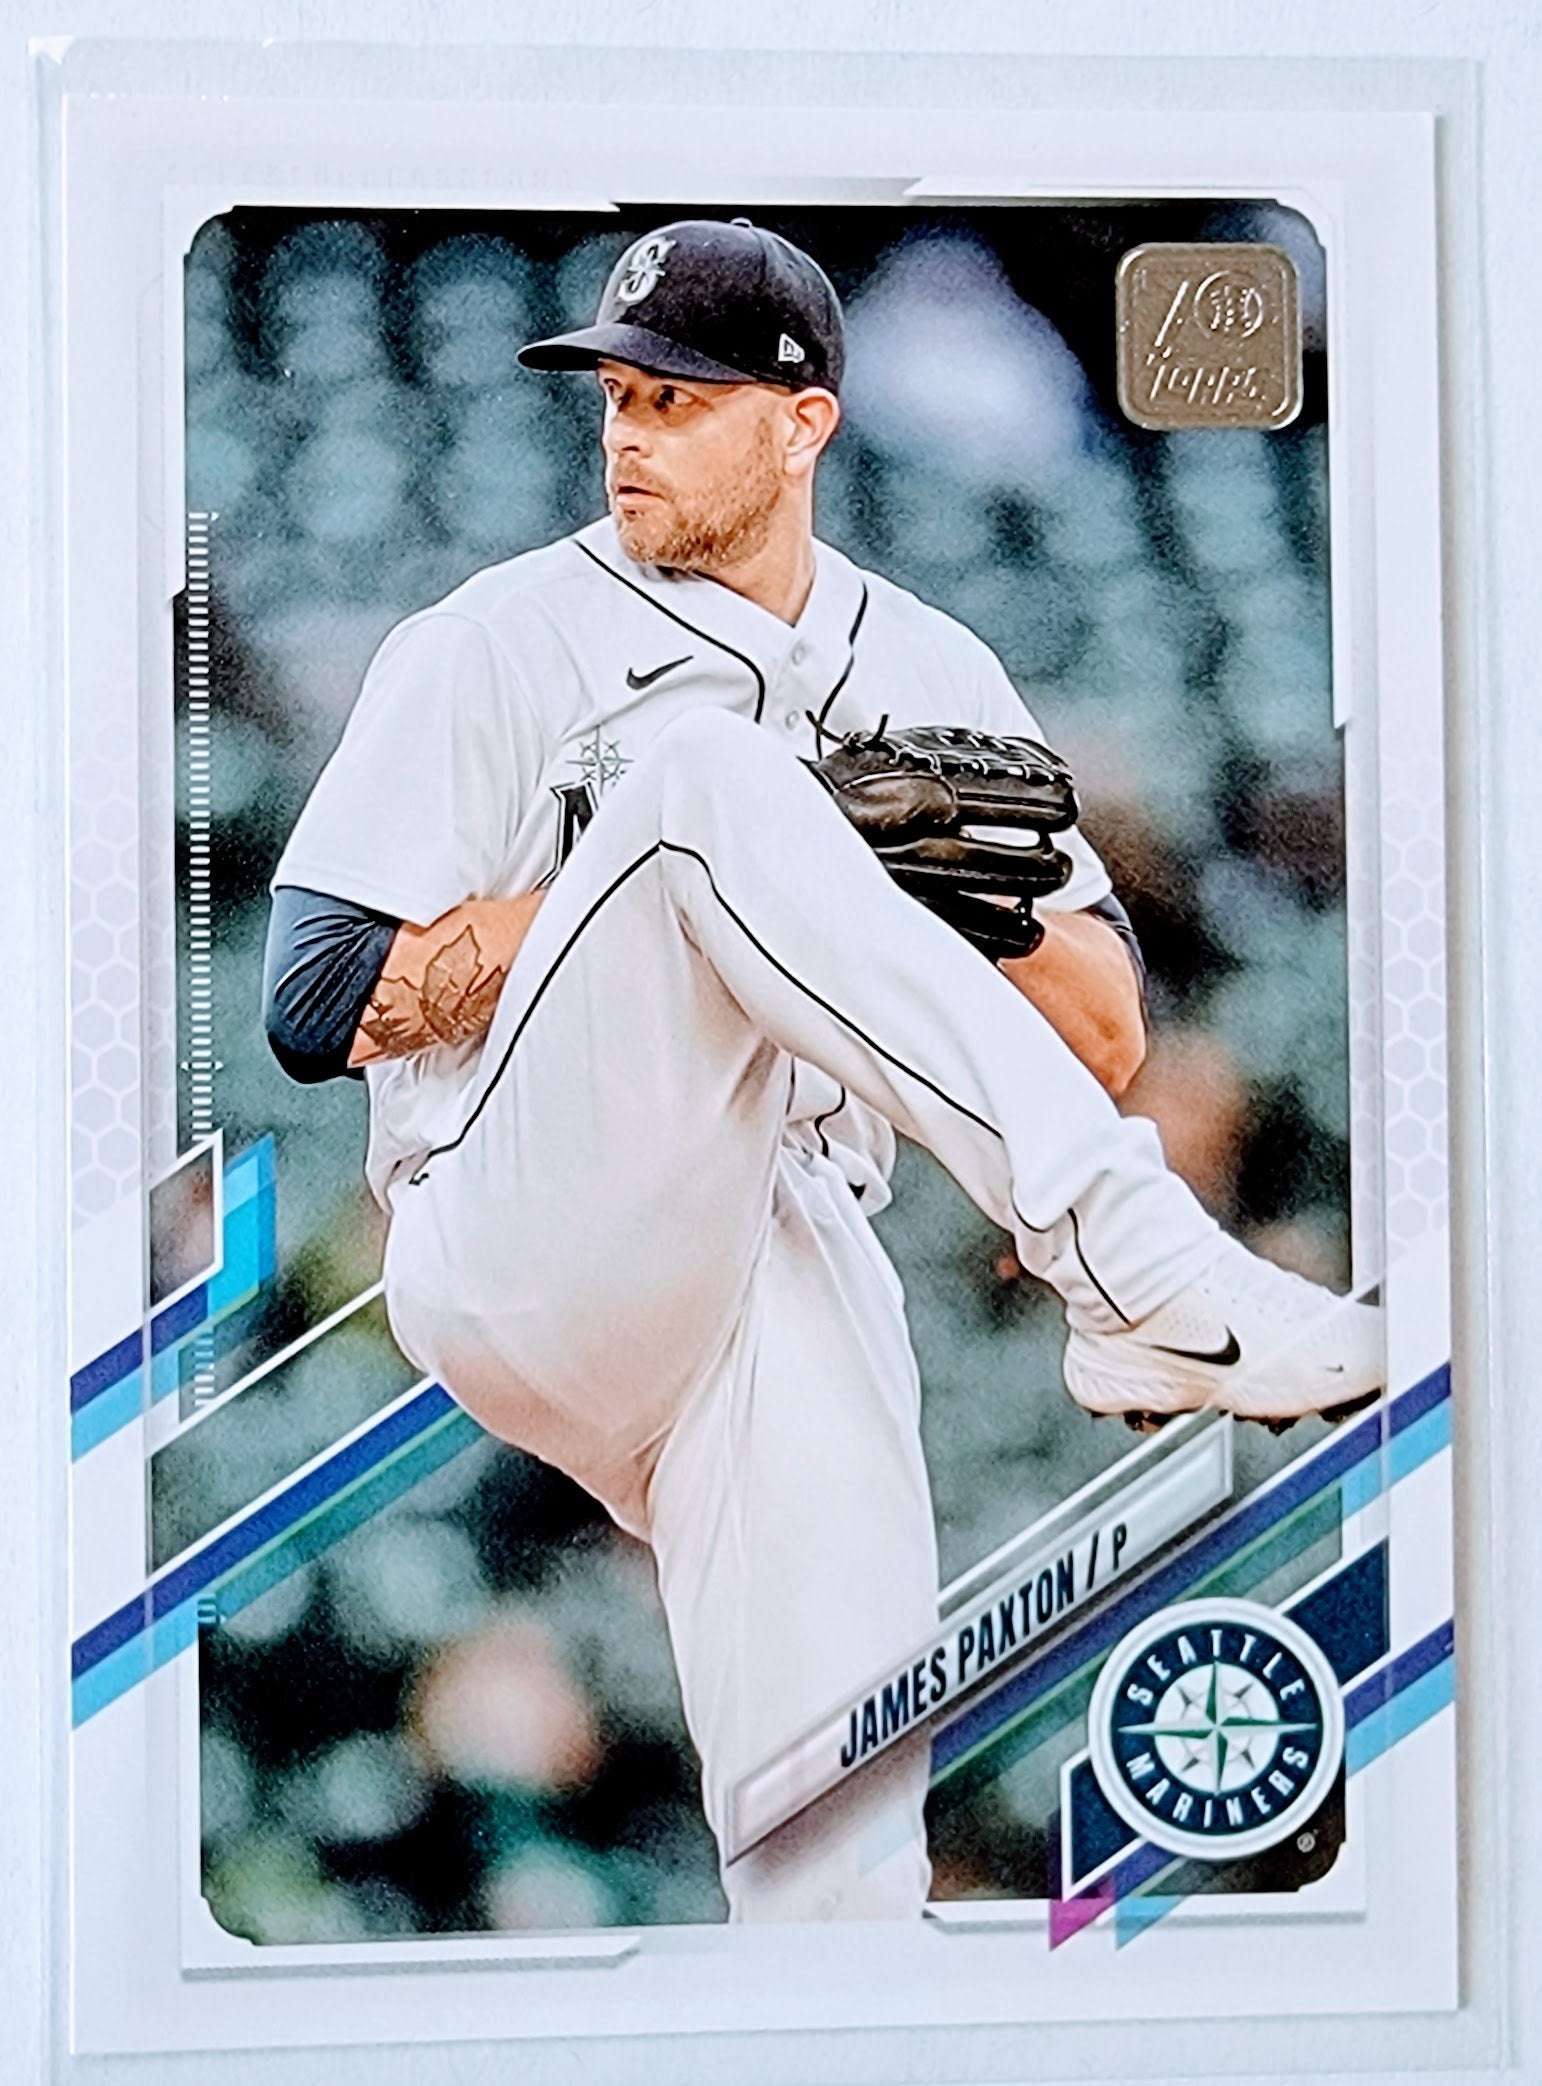 2021 Topps Update James Paxton Baseball Trading Card SMCB1 simple Xclusive Collectibles   